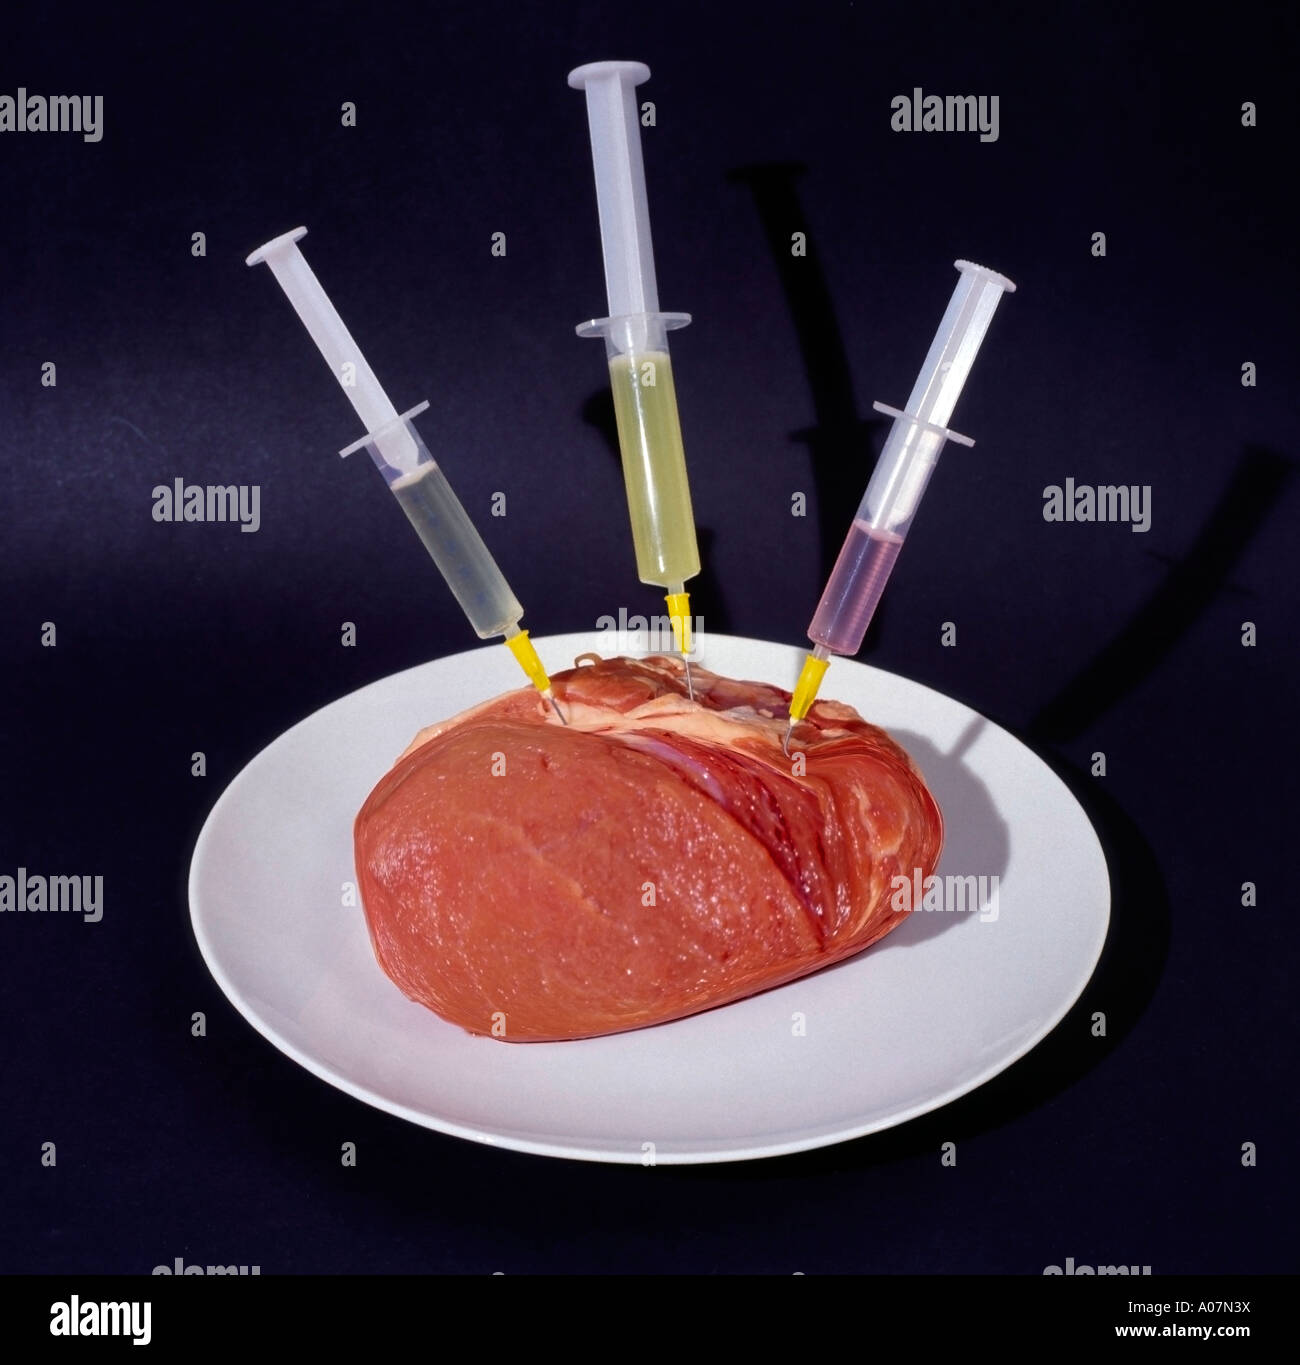 piece of pork with three syringes jabs shots Stock Photo